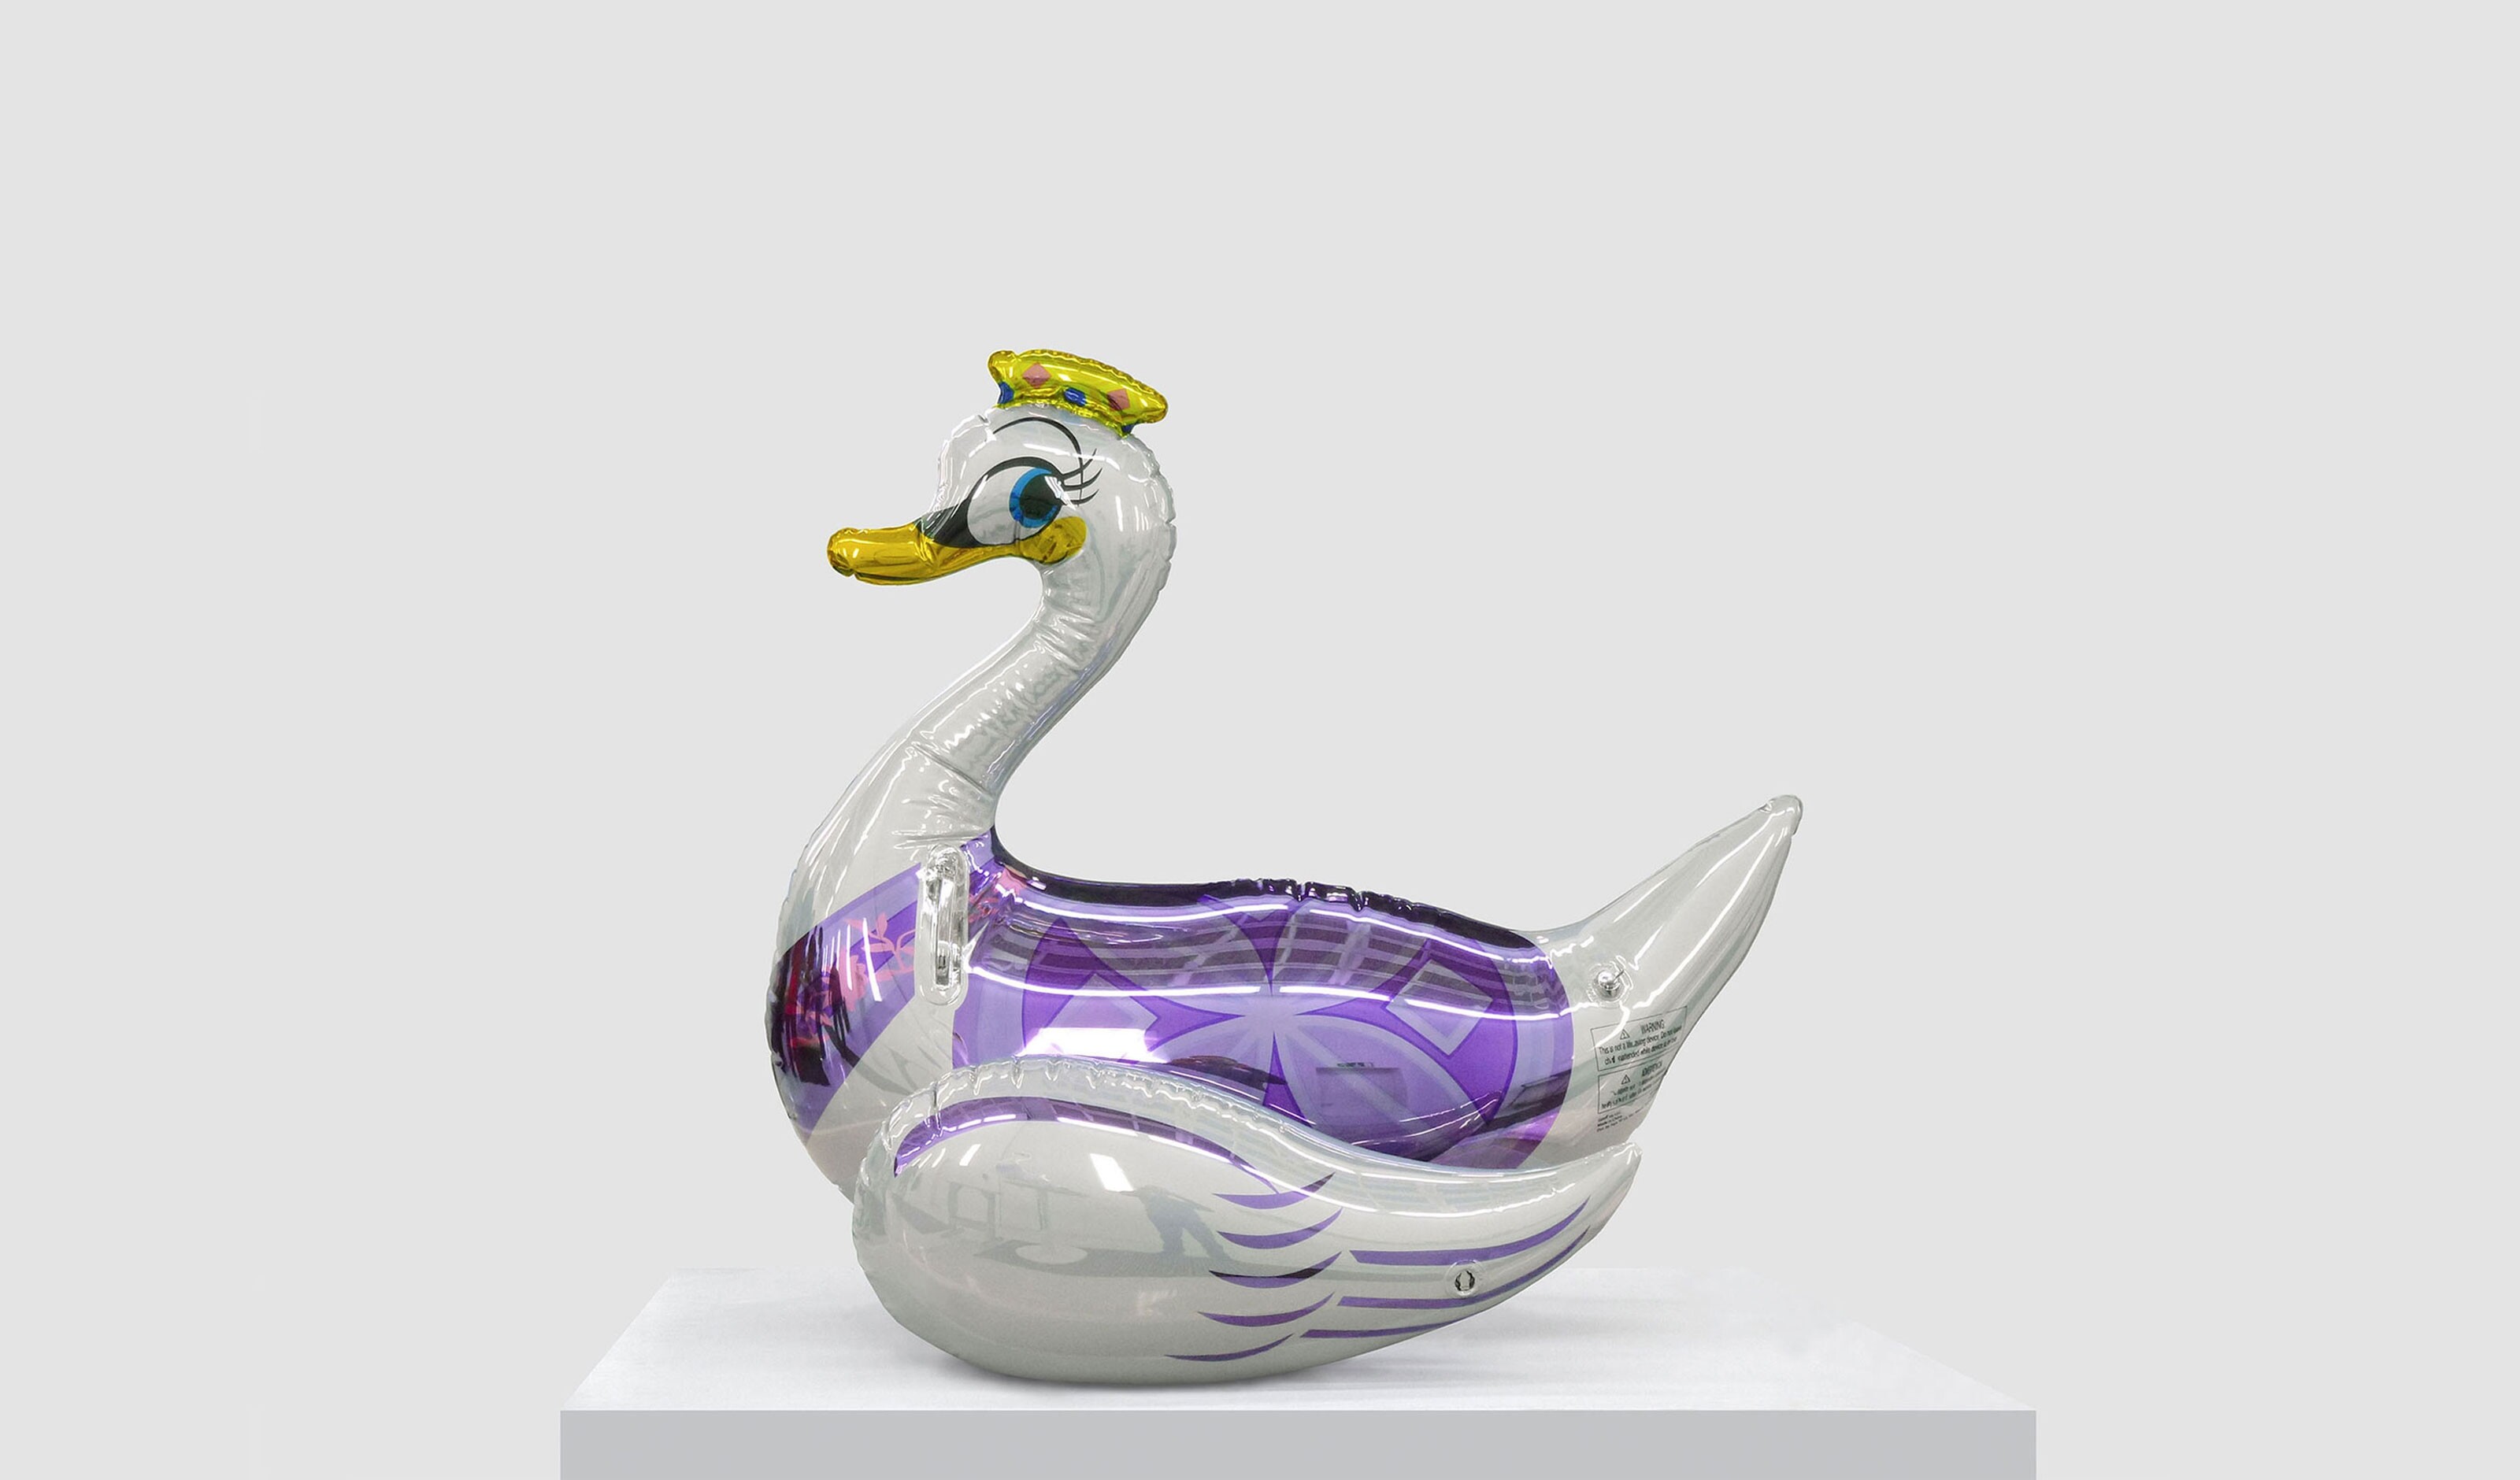 A sculpture by Jeff Koons, titled Swan (Inflatable), dated 2011-2015.